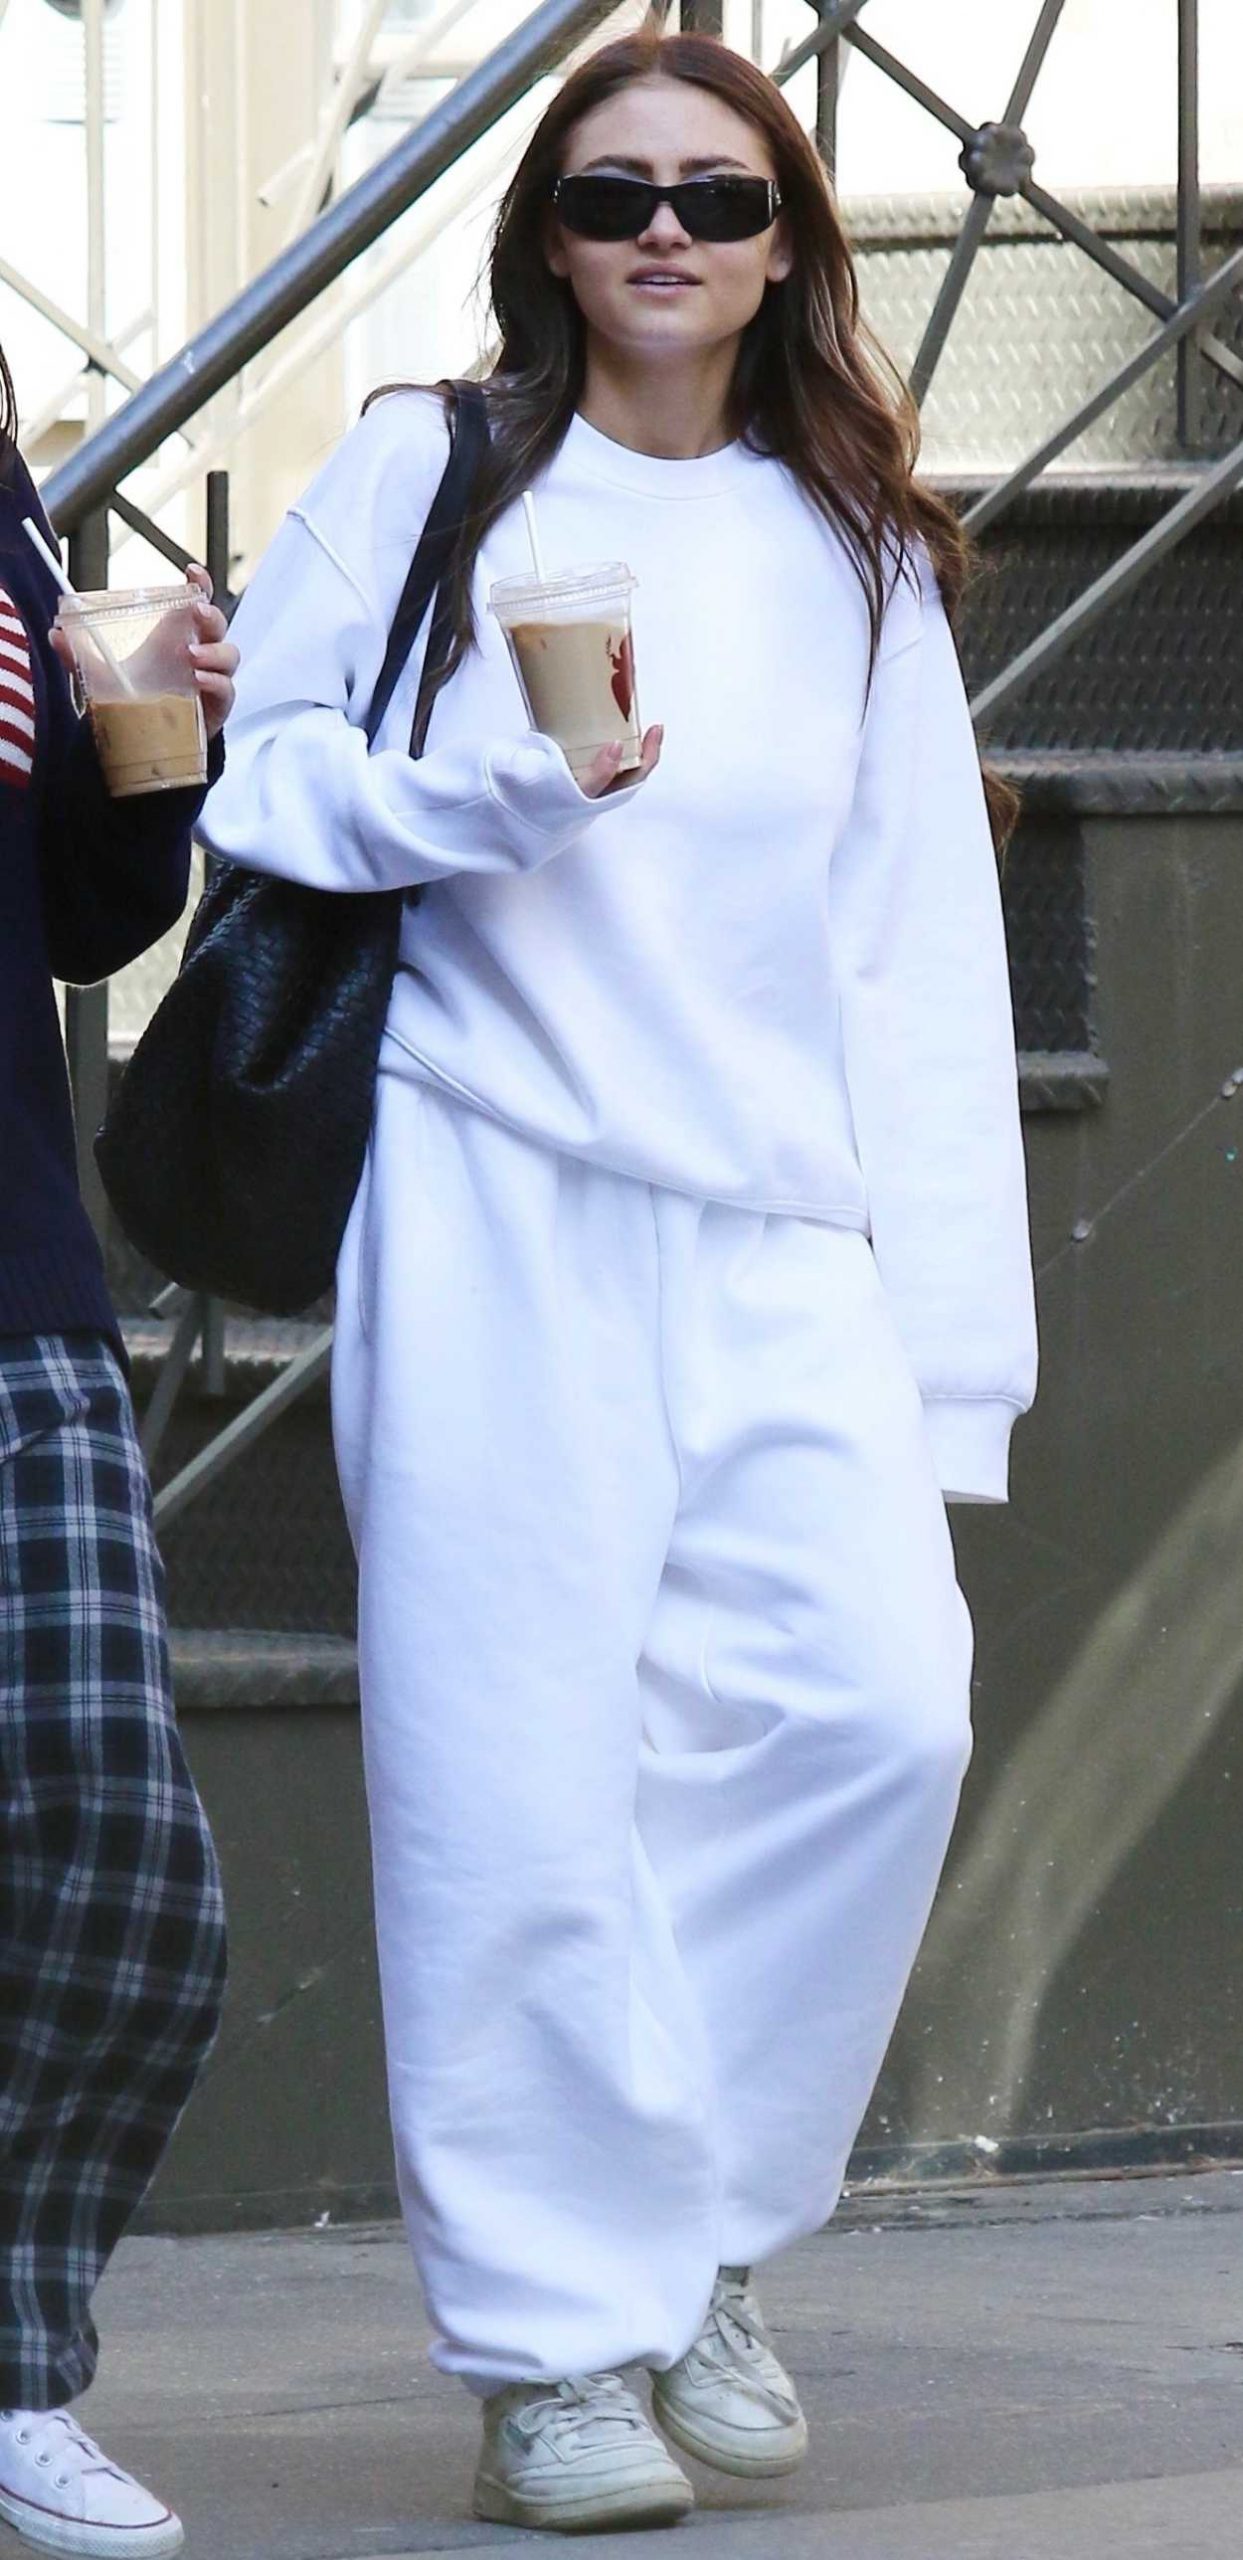 Leni Klum in a White Sweatsuit Was Seen Out with a Friend in New York ...